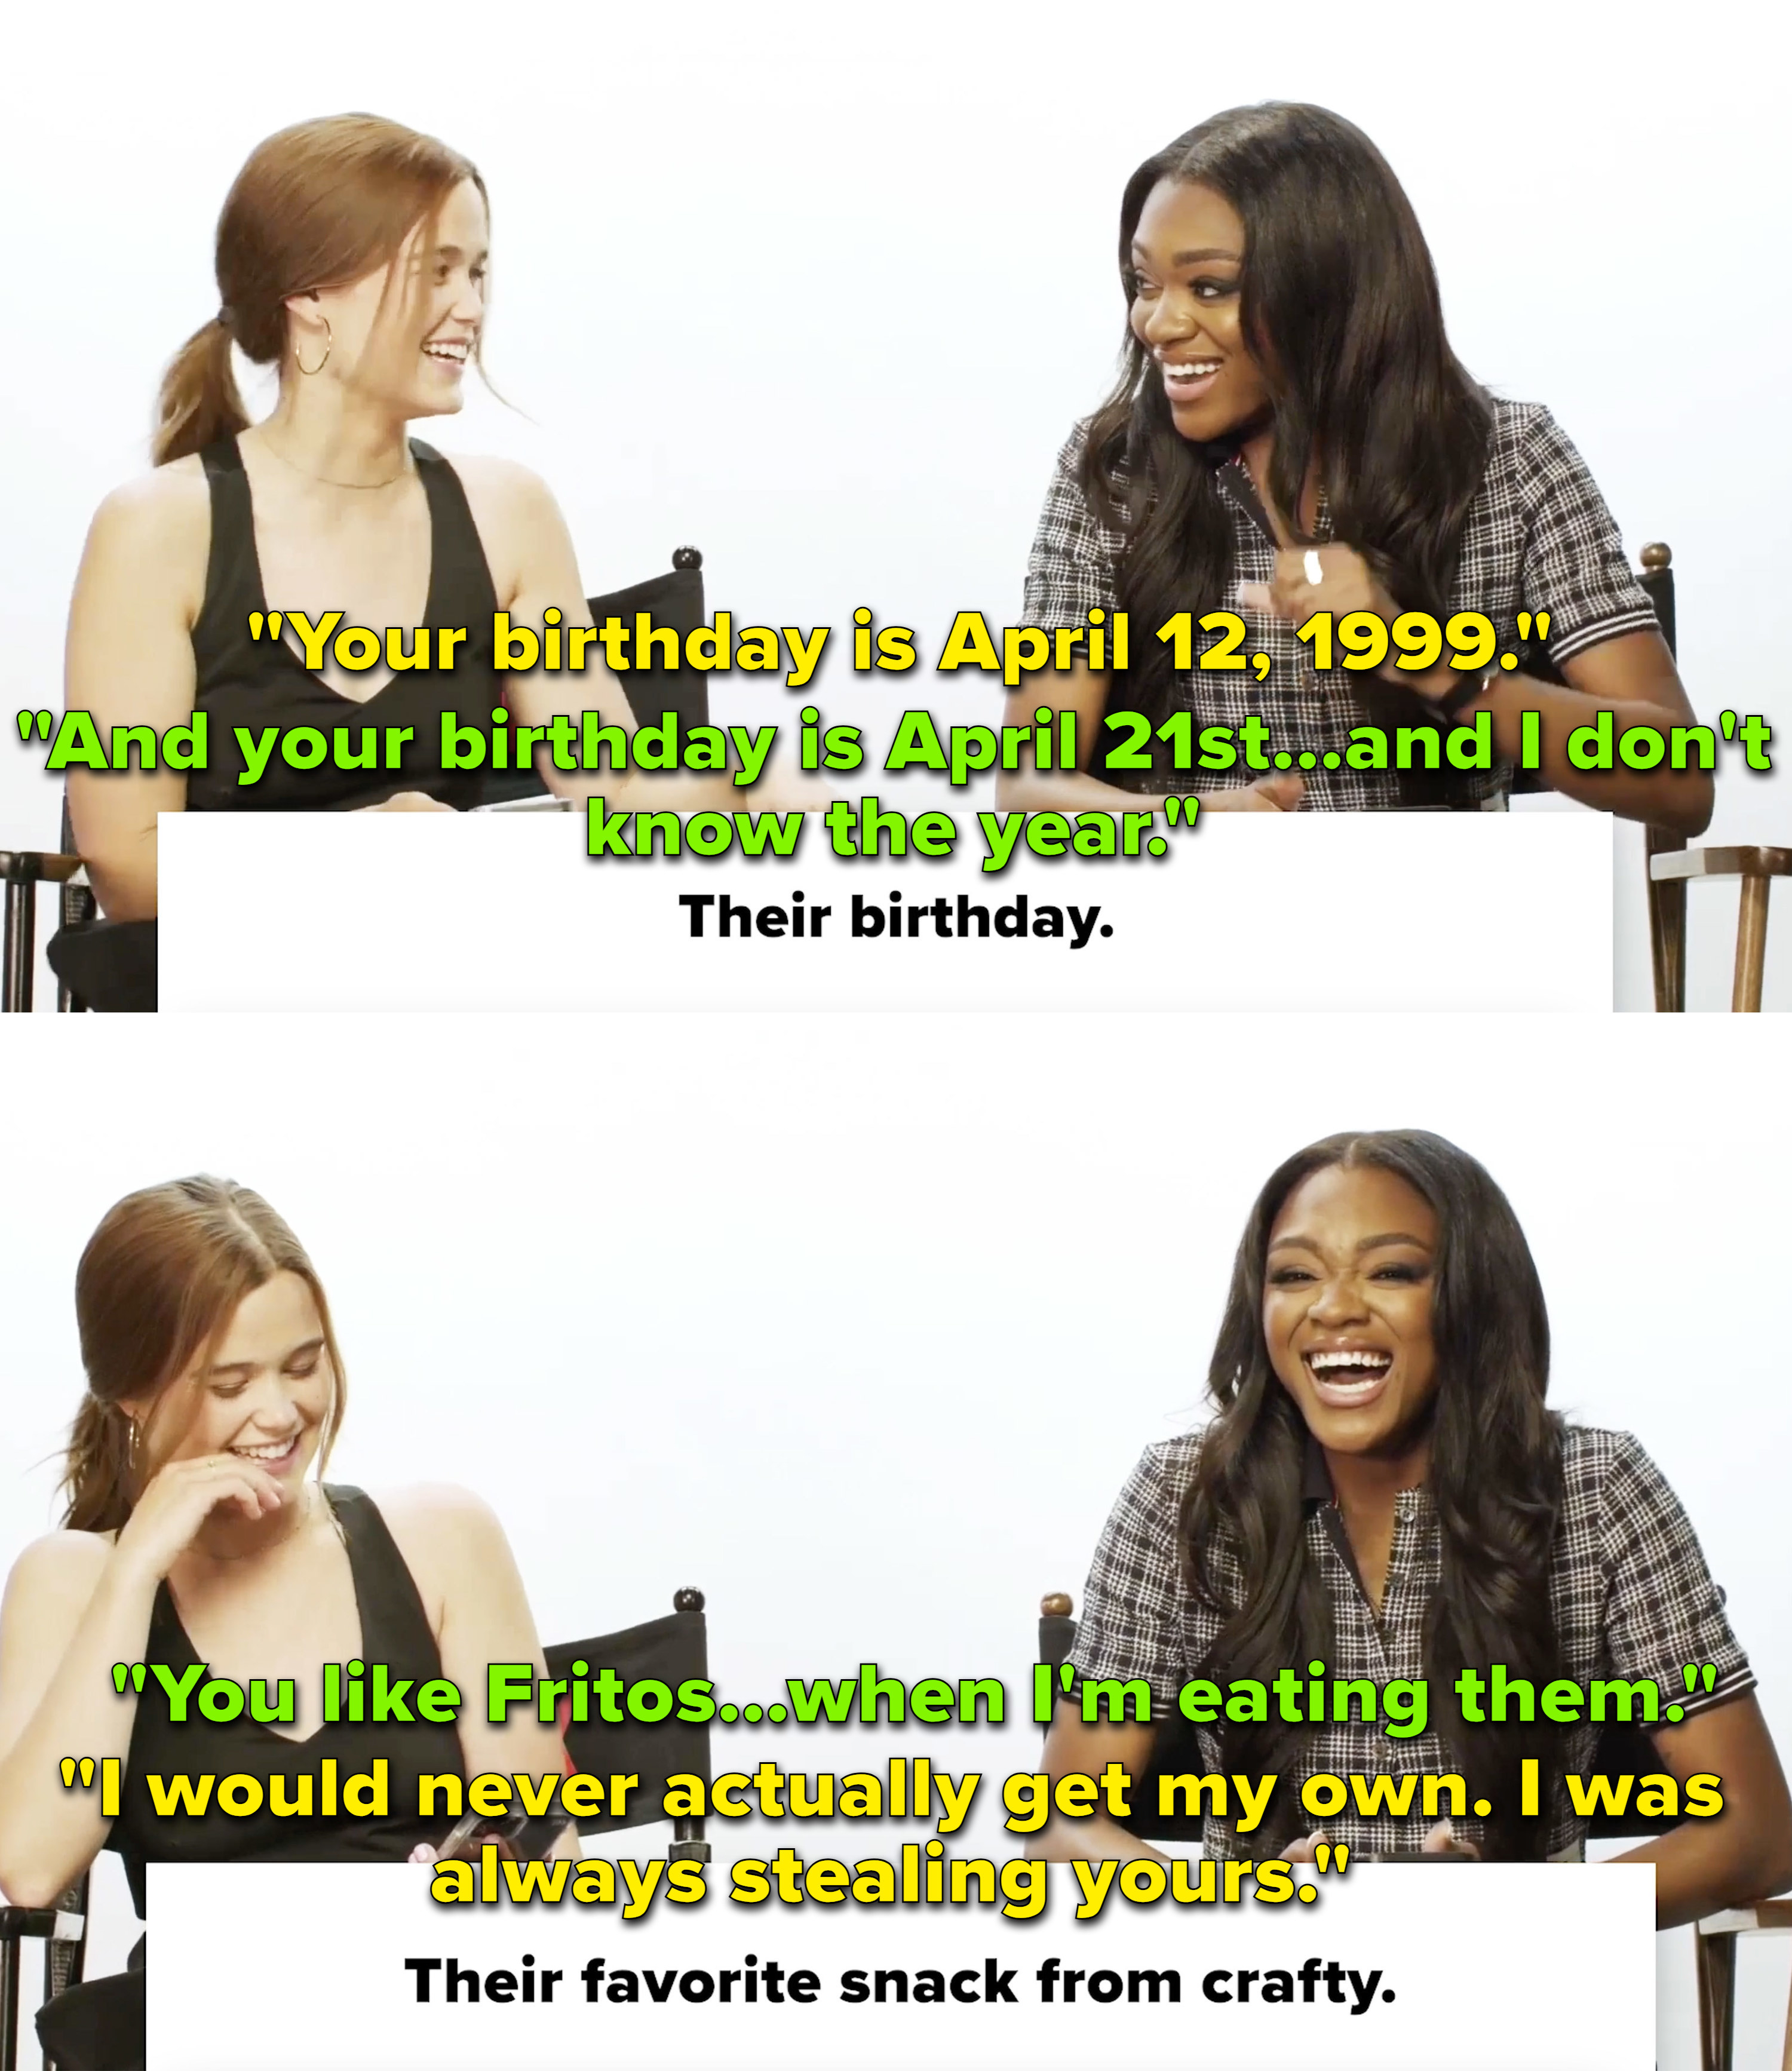 Both actors laughing, with text such as &quot;Your birthday is April 21, 1999&quot; and &quot;You like Fritos — when I&#x27;m eating them&quot;